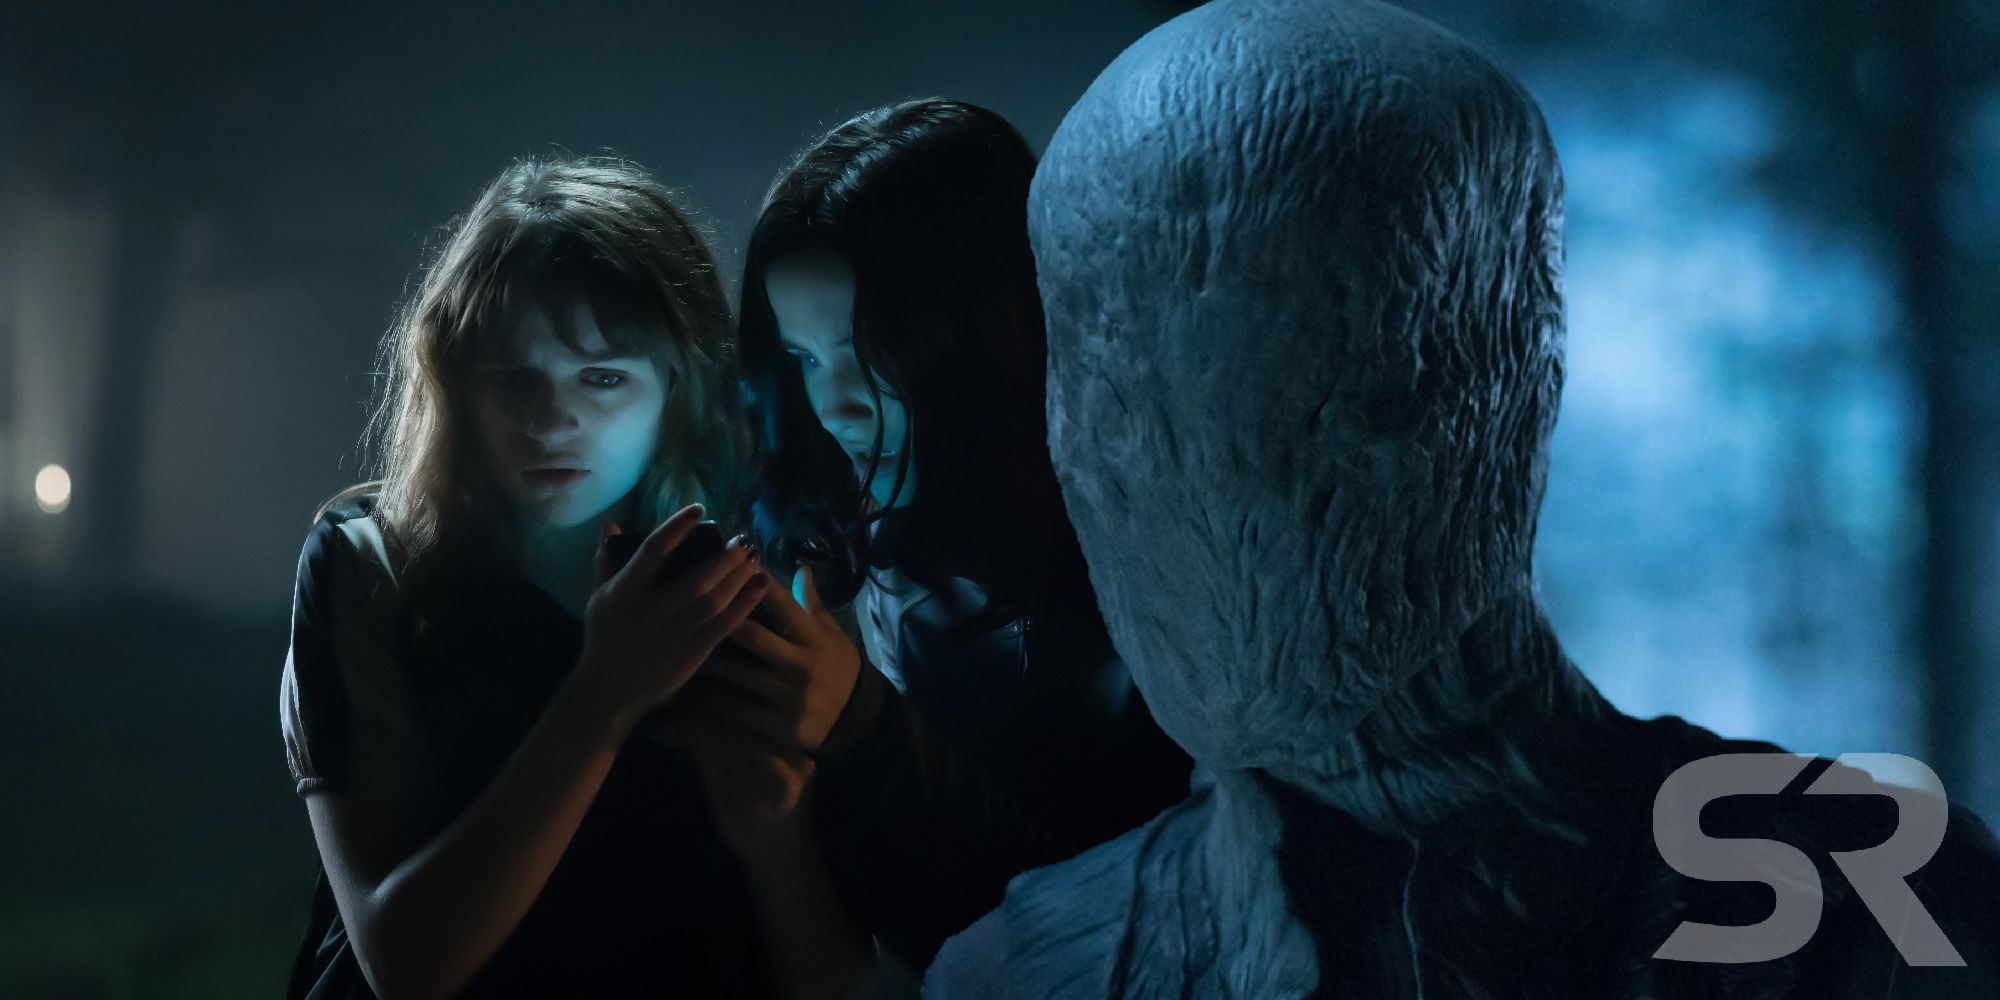 Slender Man The Horror Movies Biggest Problem Is Revealed In Its Trailer